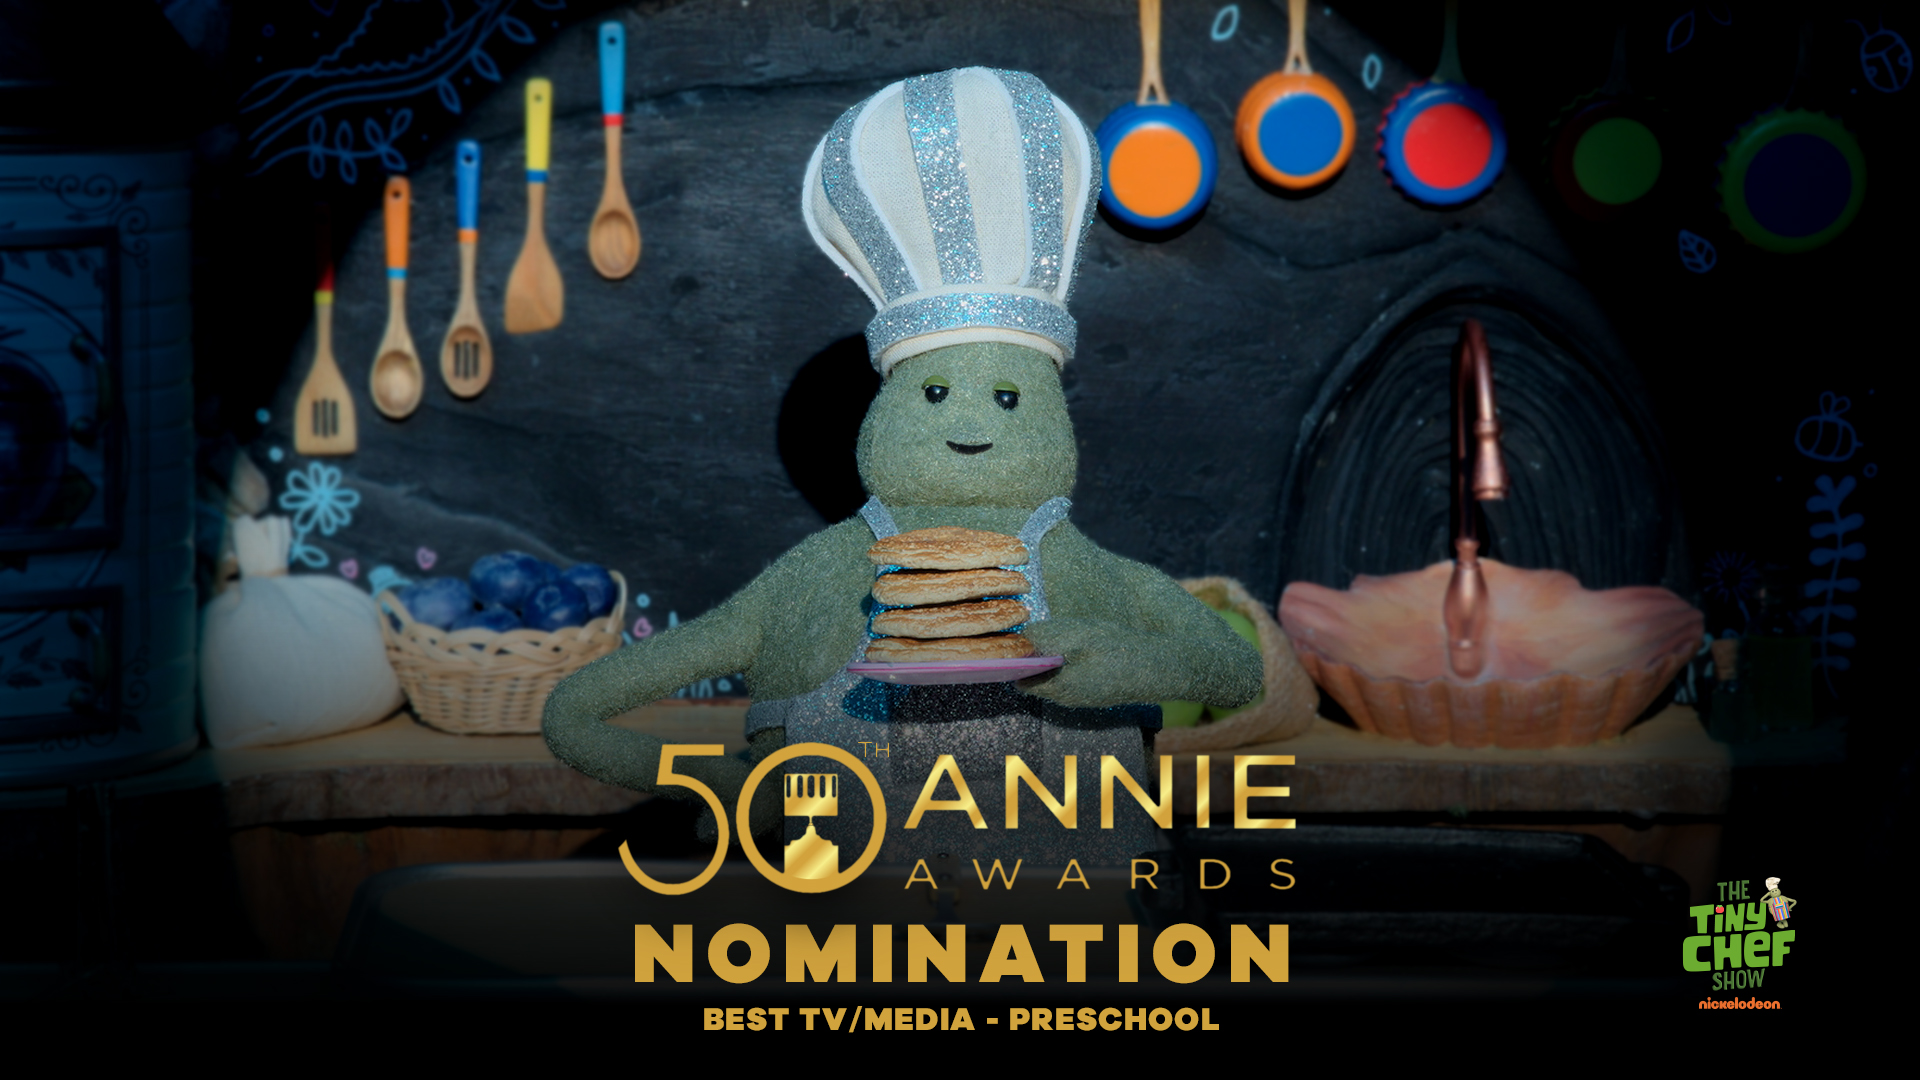 The Tiny Chef Show receives Annie awards nomination